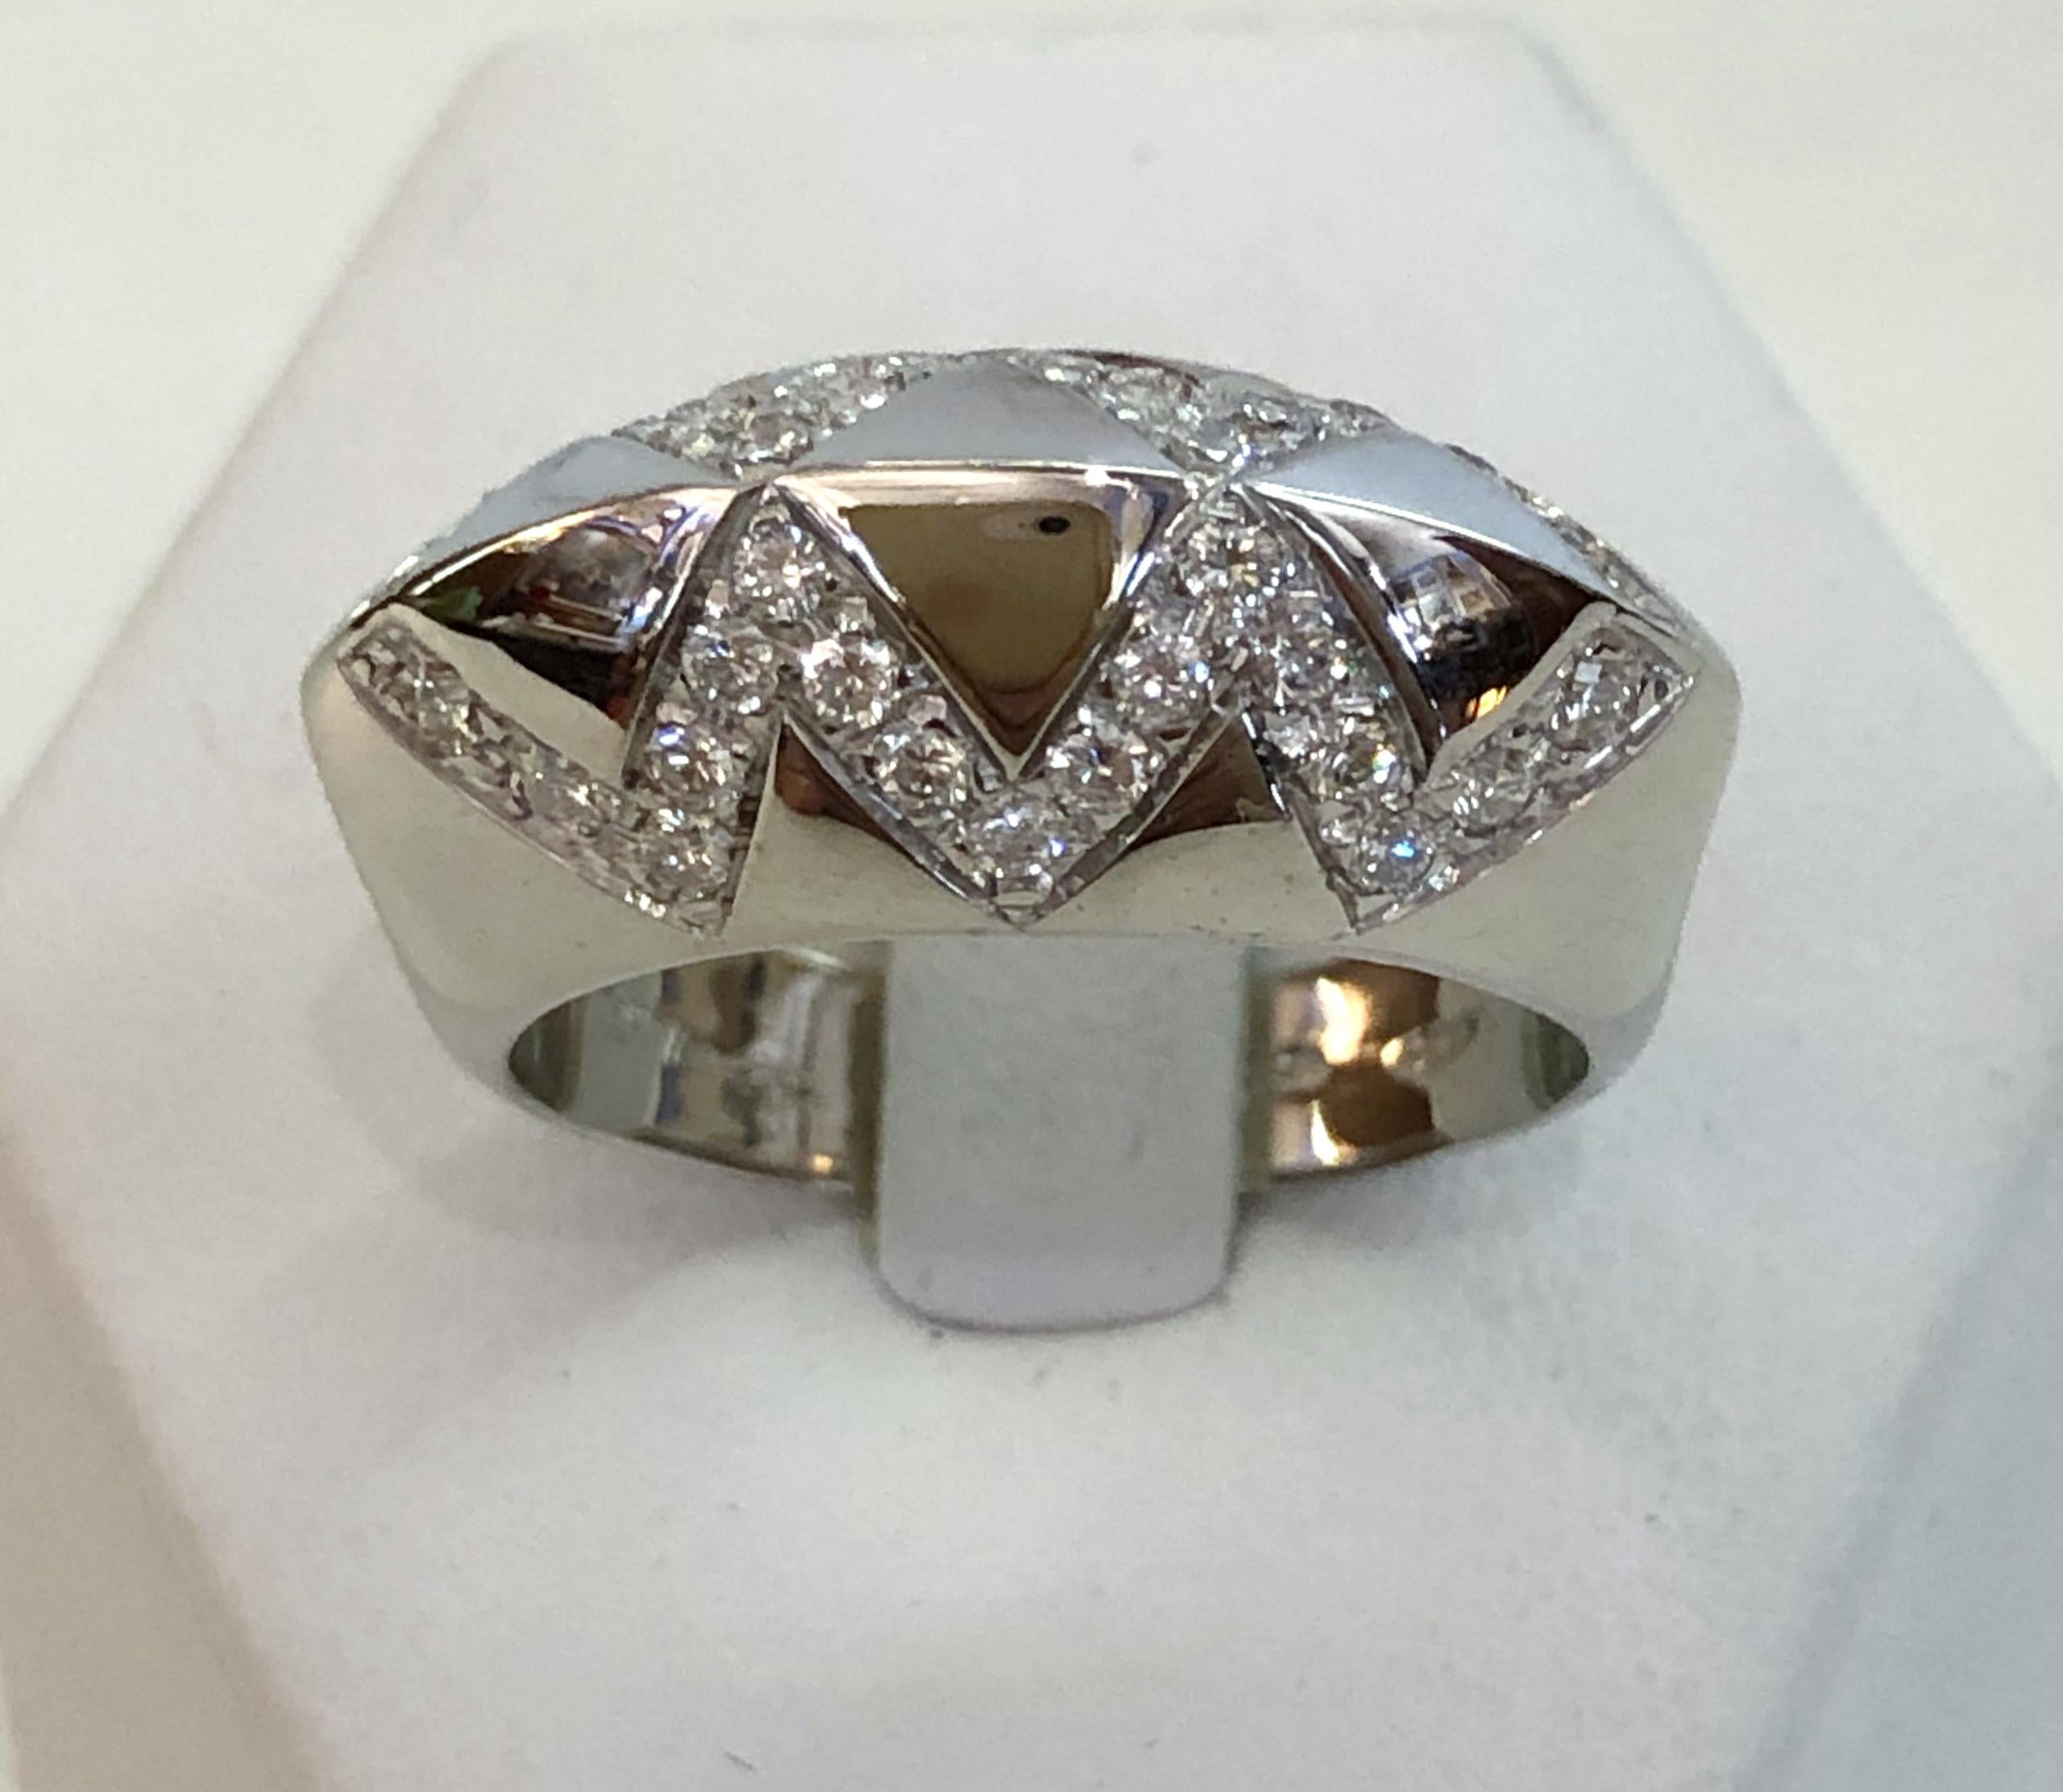 18 karat white gold band ring with brilliant diamonds for a total of 0.5 karats, forming a Greek zig zag pattern / Italy 1970s
Ring size US 7.5